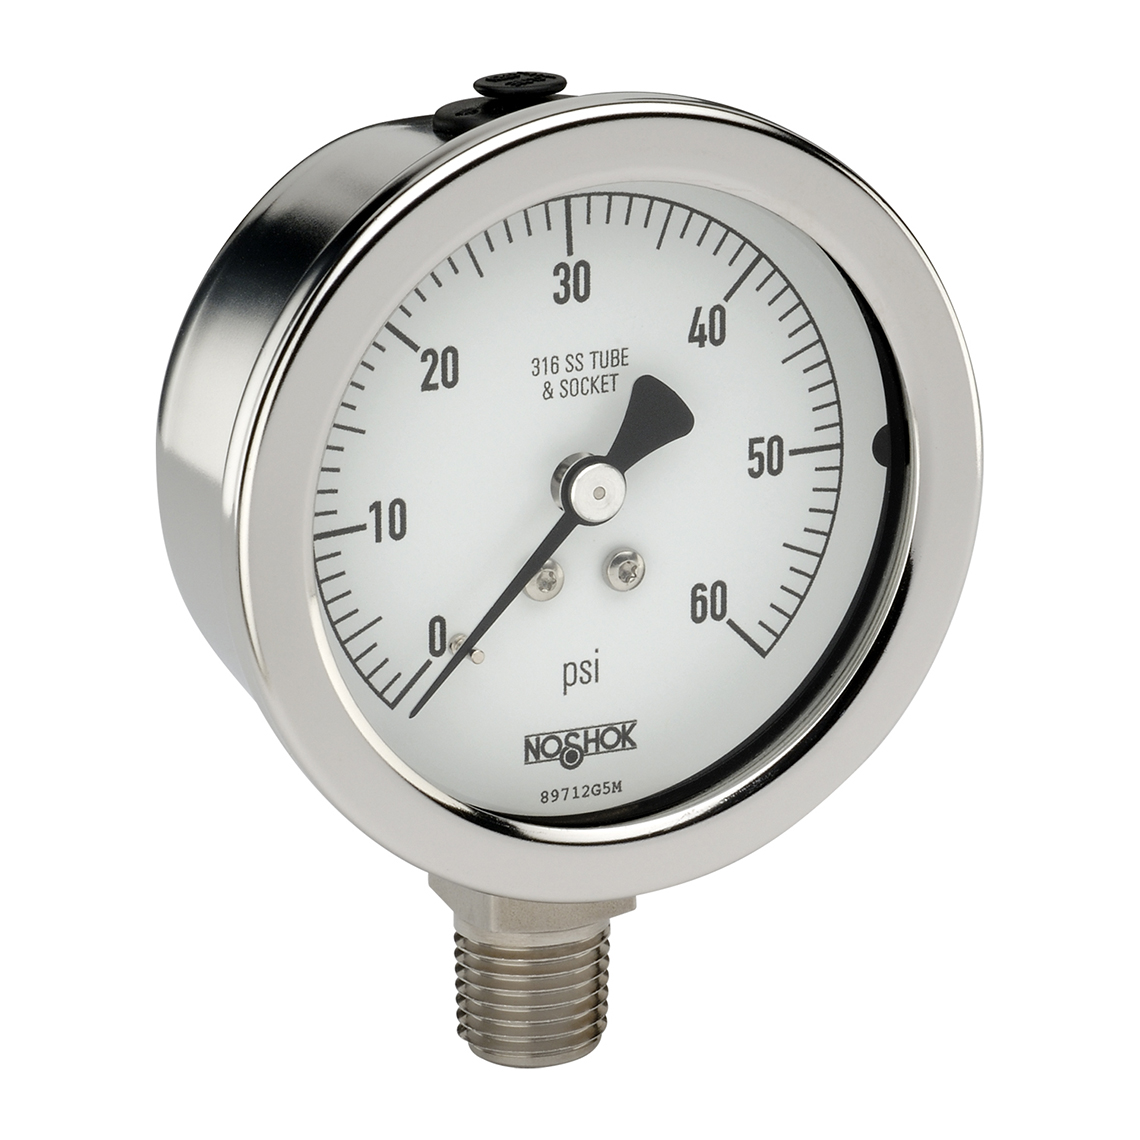 25-400-30-psi-ST 400/500 Series All Stainless Steel Dry and Liquid Filled Pressure Gauges